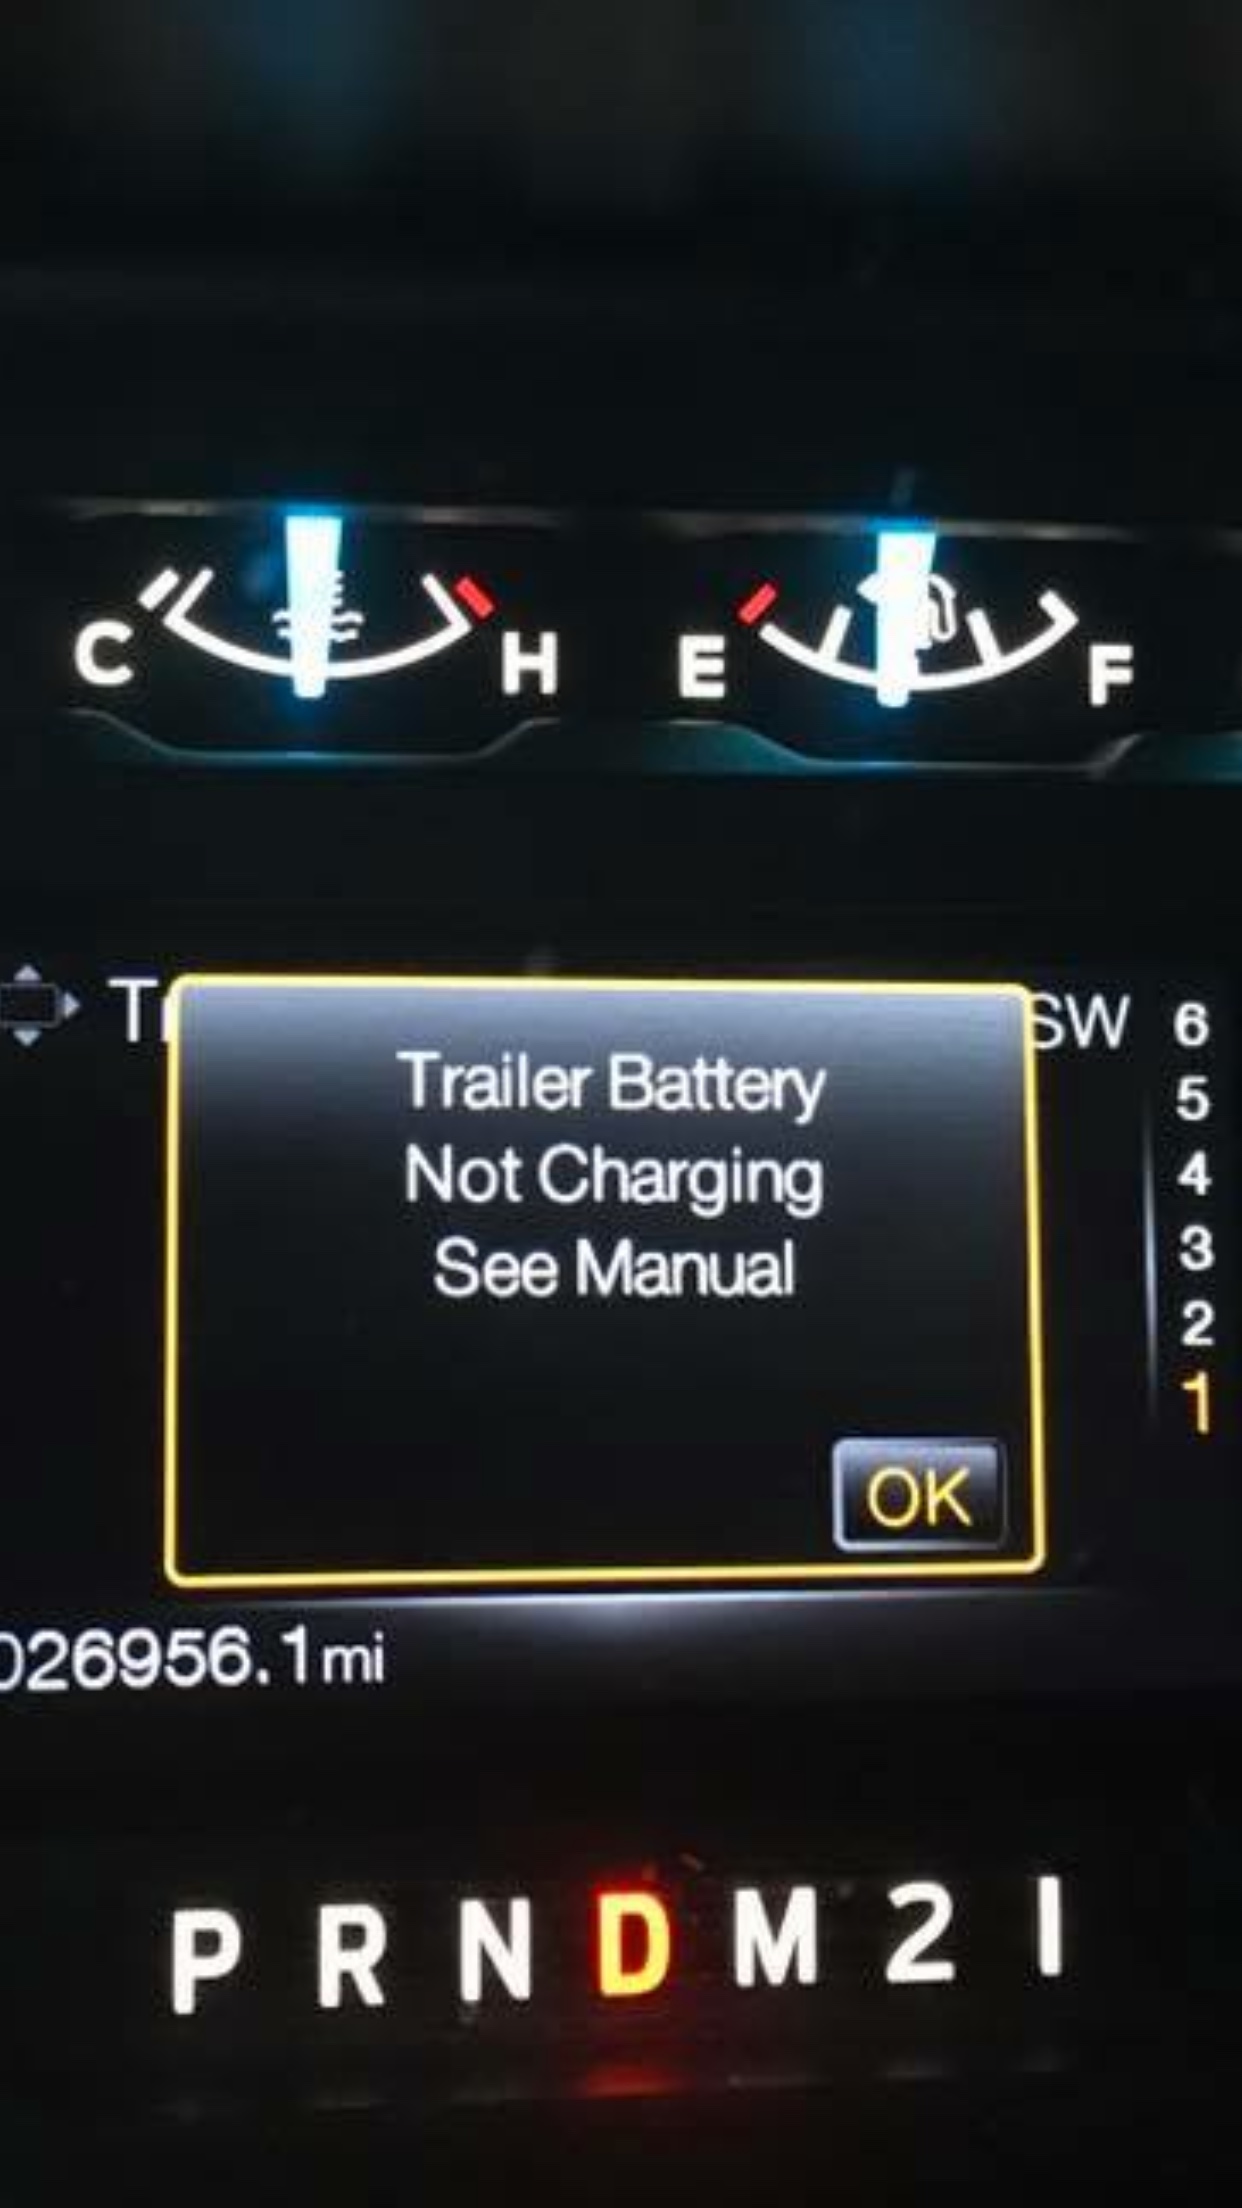 Trailer Battery not charging - Ford Truck Enthusiasts Forums 2015 Ford F150 Trailer Battery Not Charging